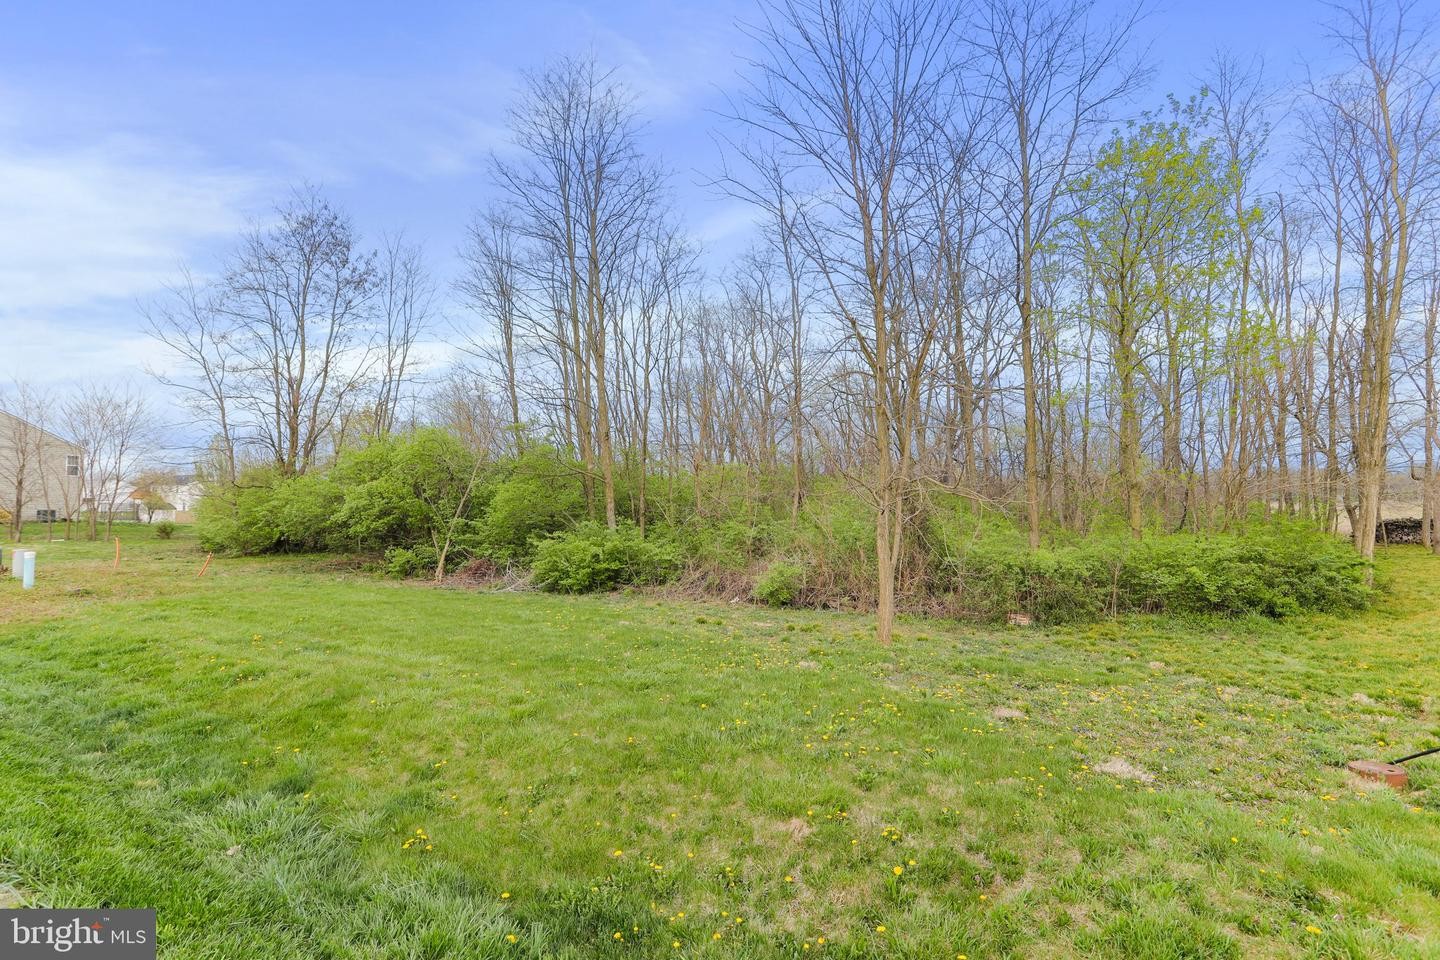 2. Lot 66 Wedgewood Dr